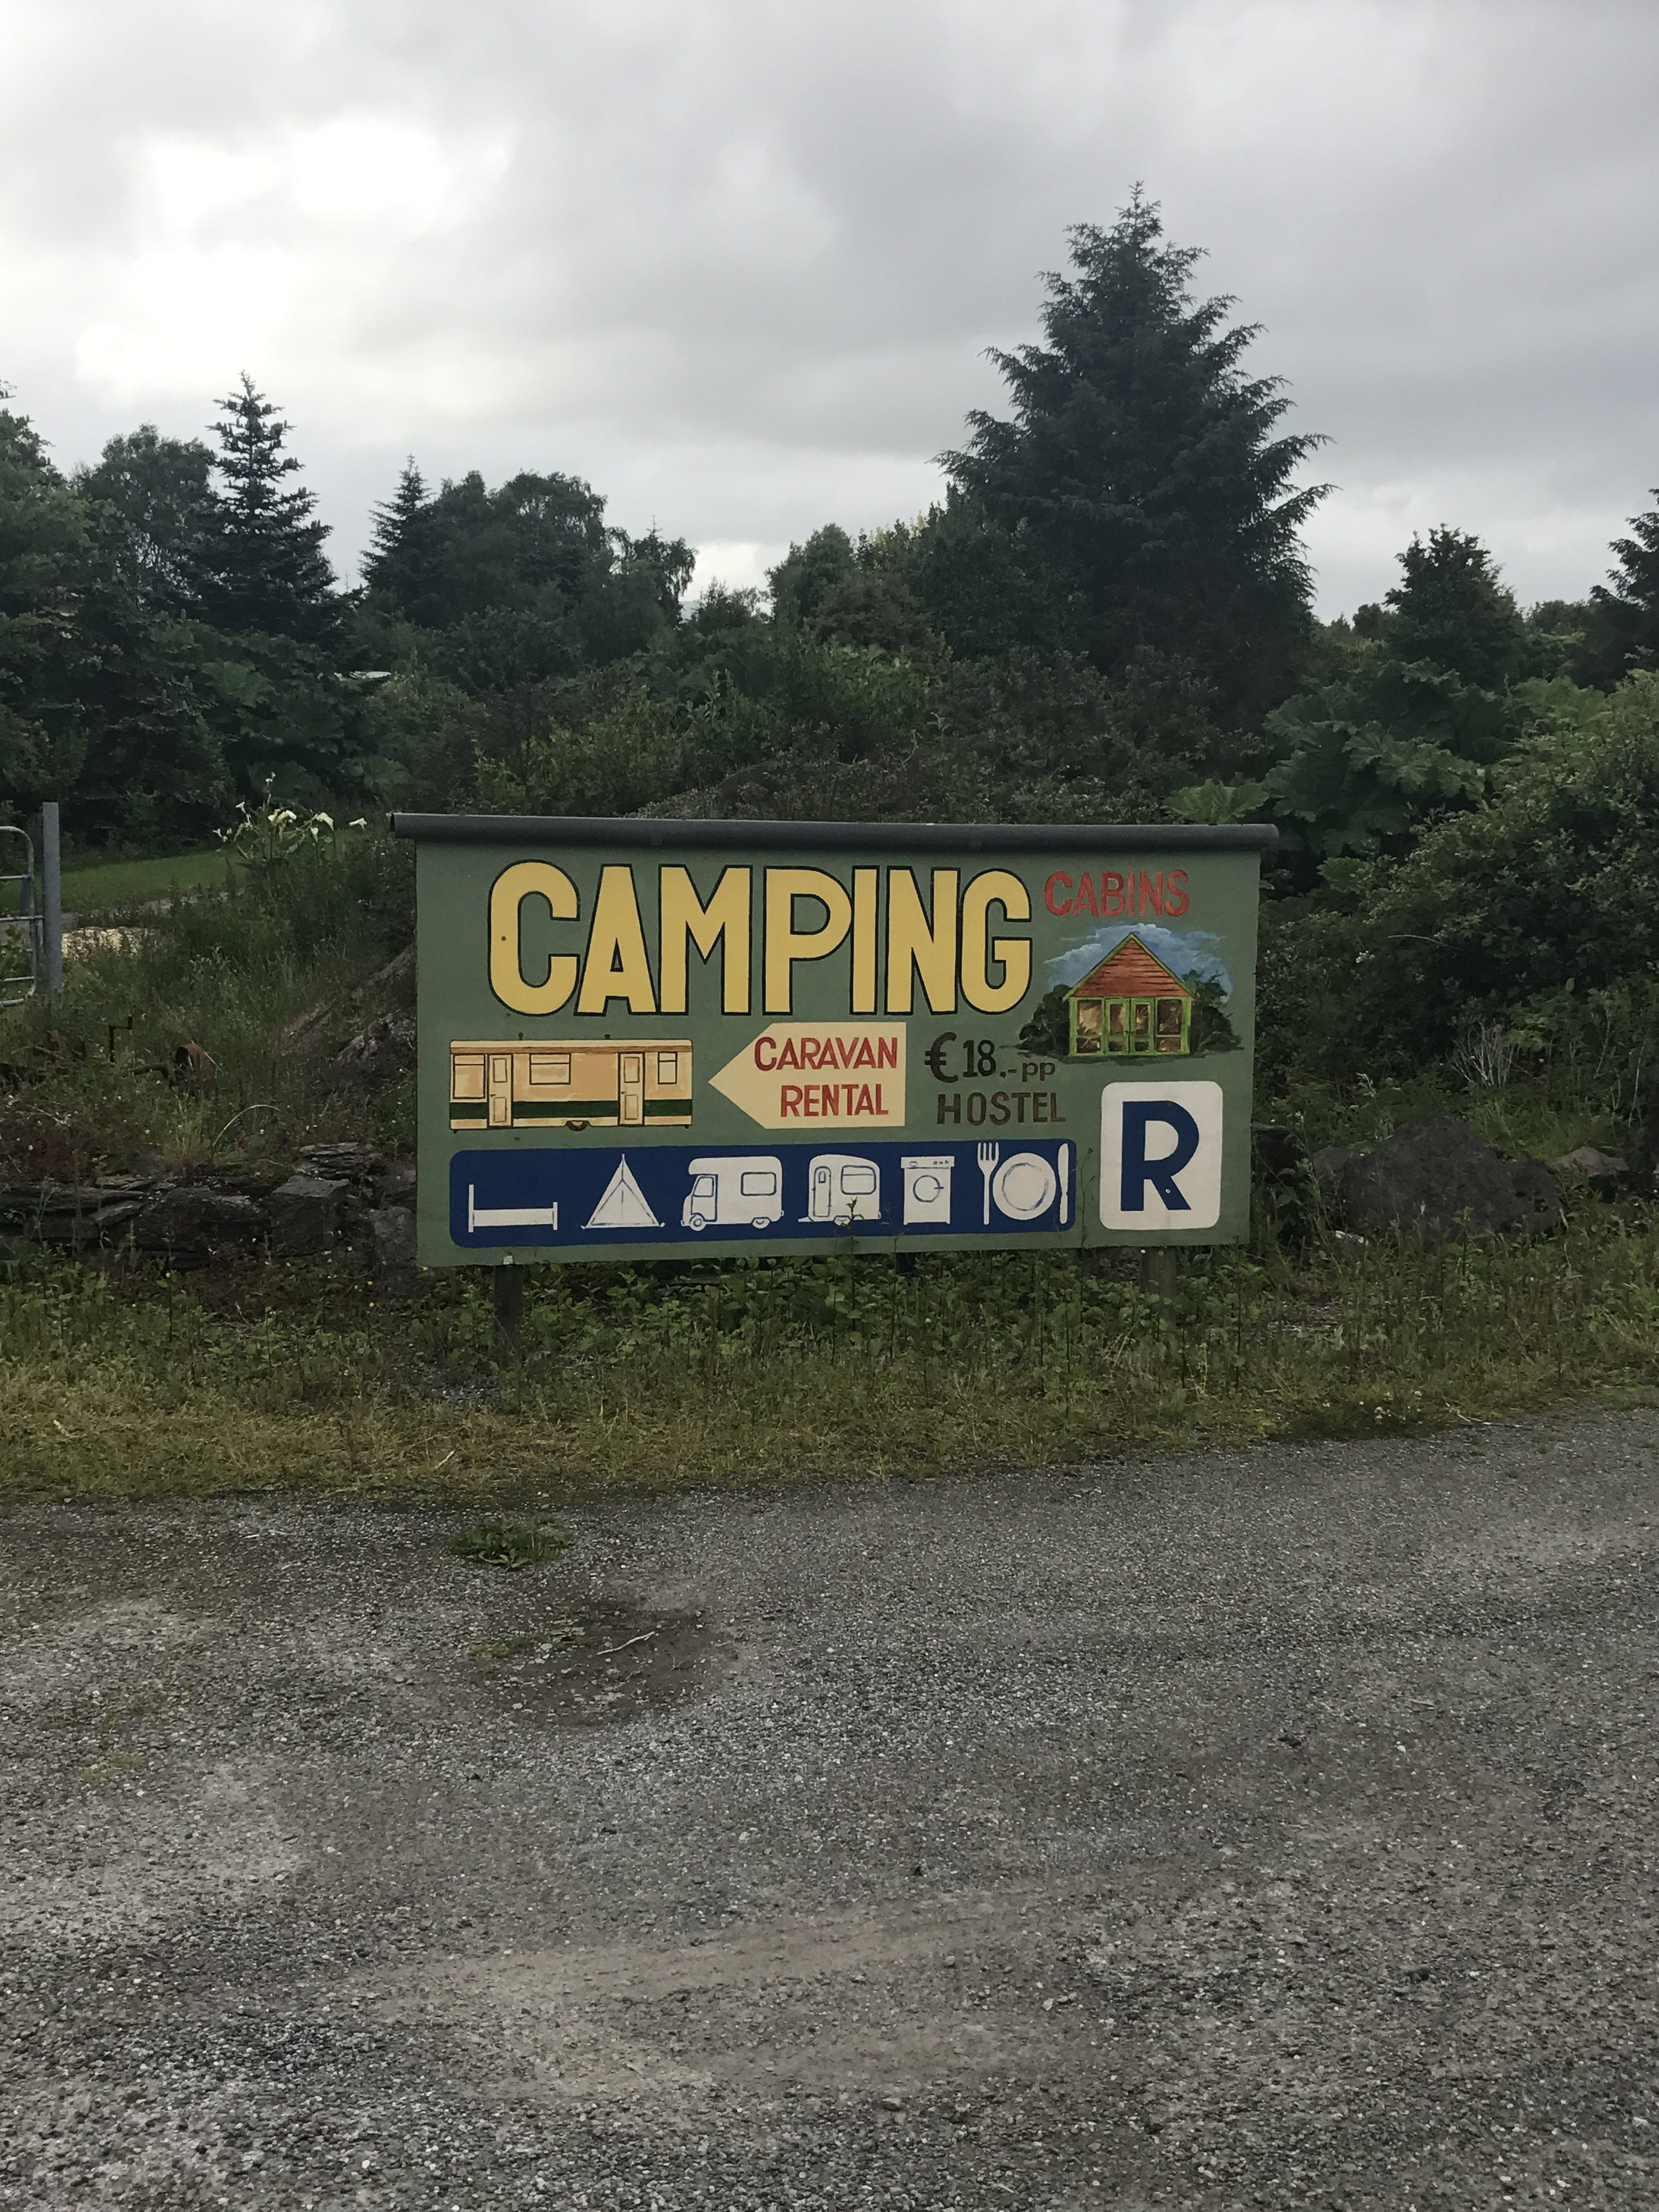 Camping in Europe